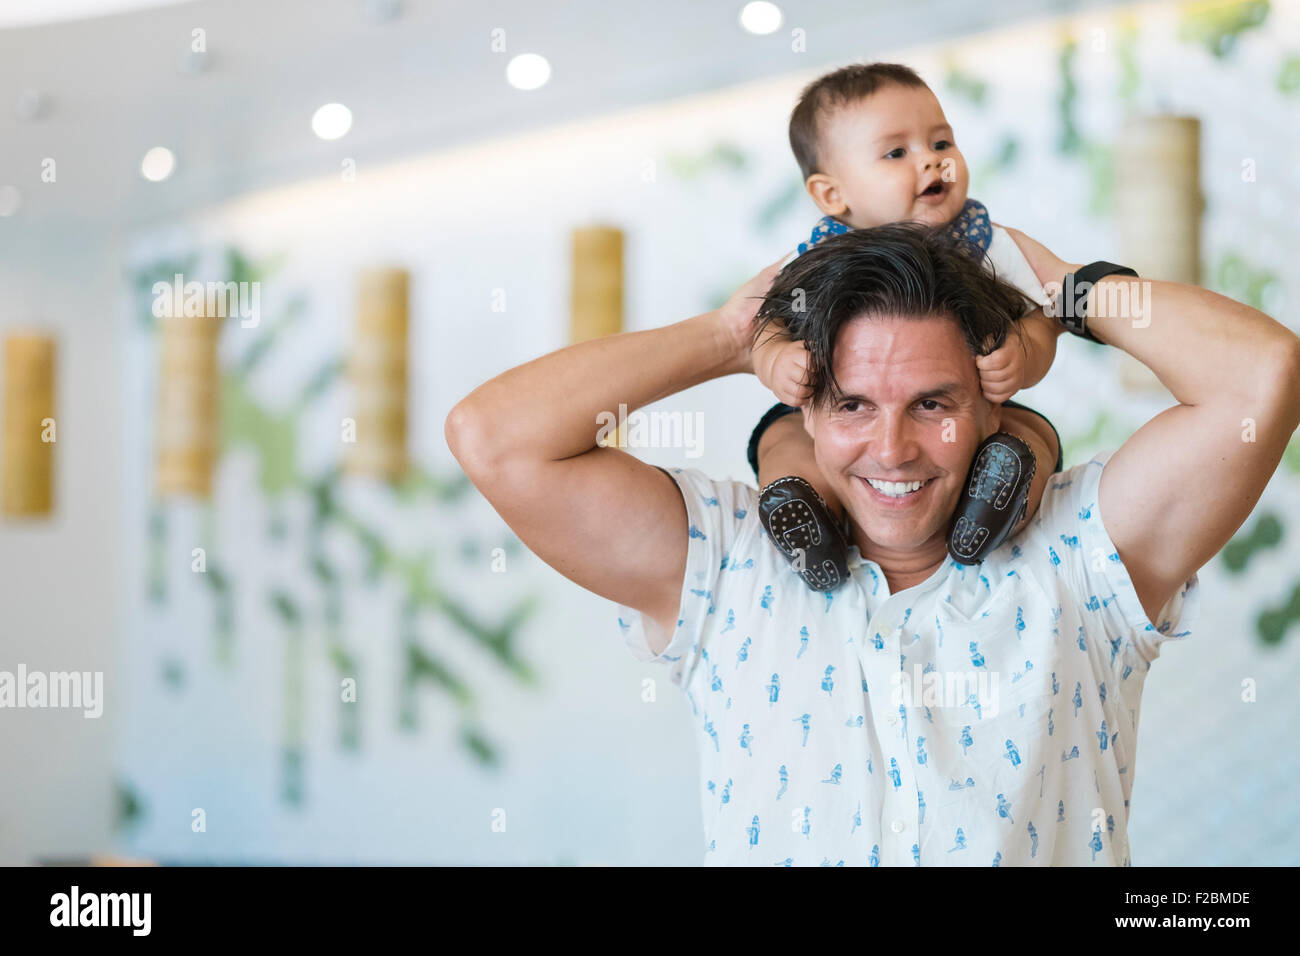 Smiling man is carrying a baby on his shoulders Stock Photo